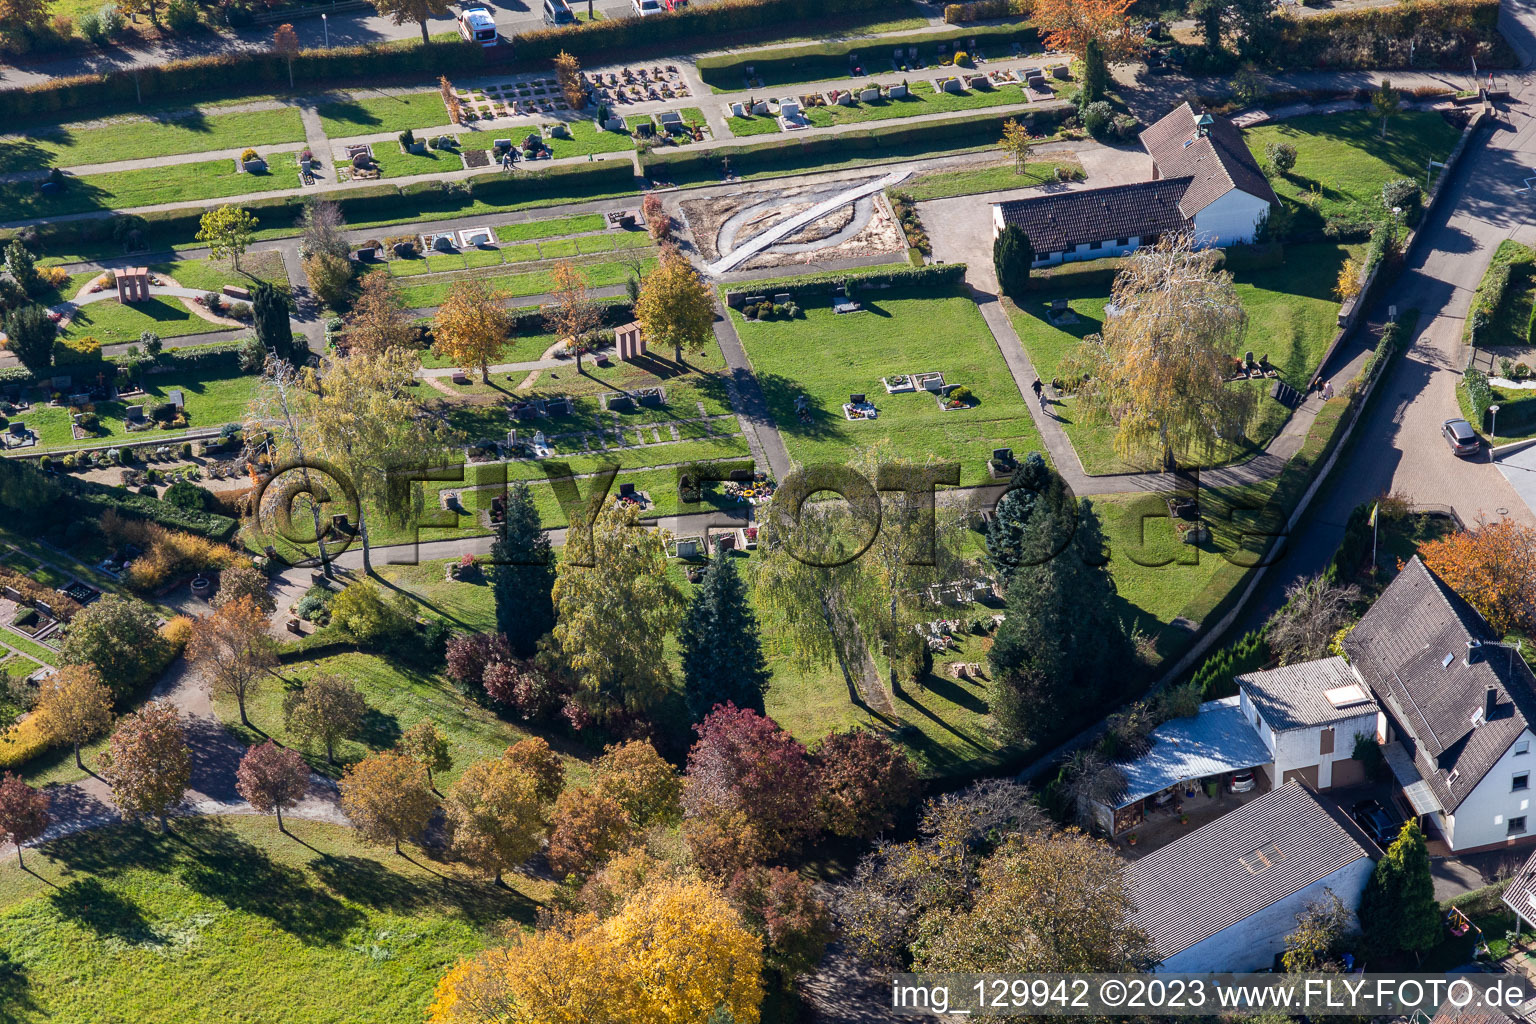 Cemetery Langensteinbach in the district Langensteinbach in Karlsbad in the state Baden-Wuerttemberg, Germany from above